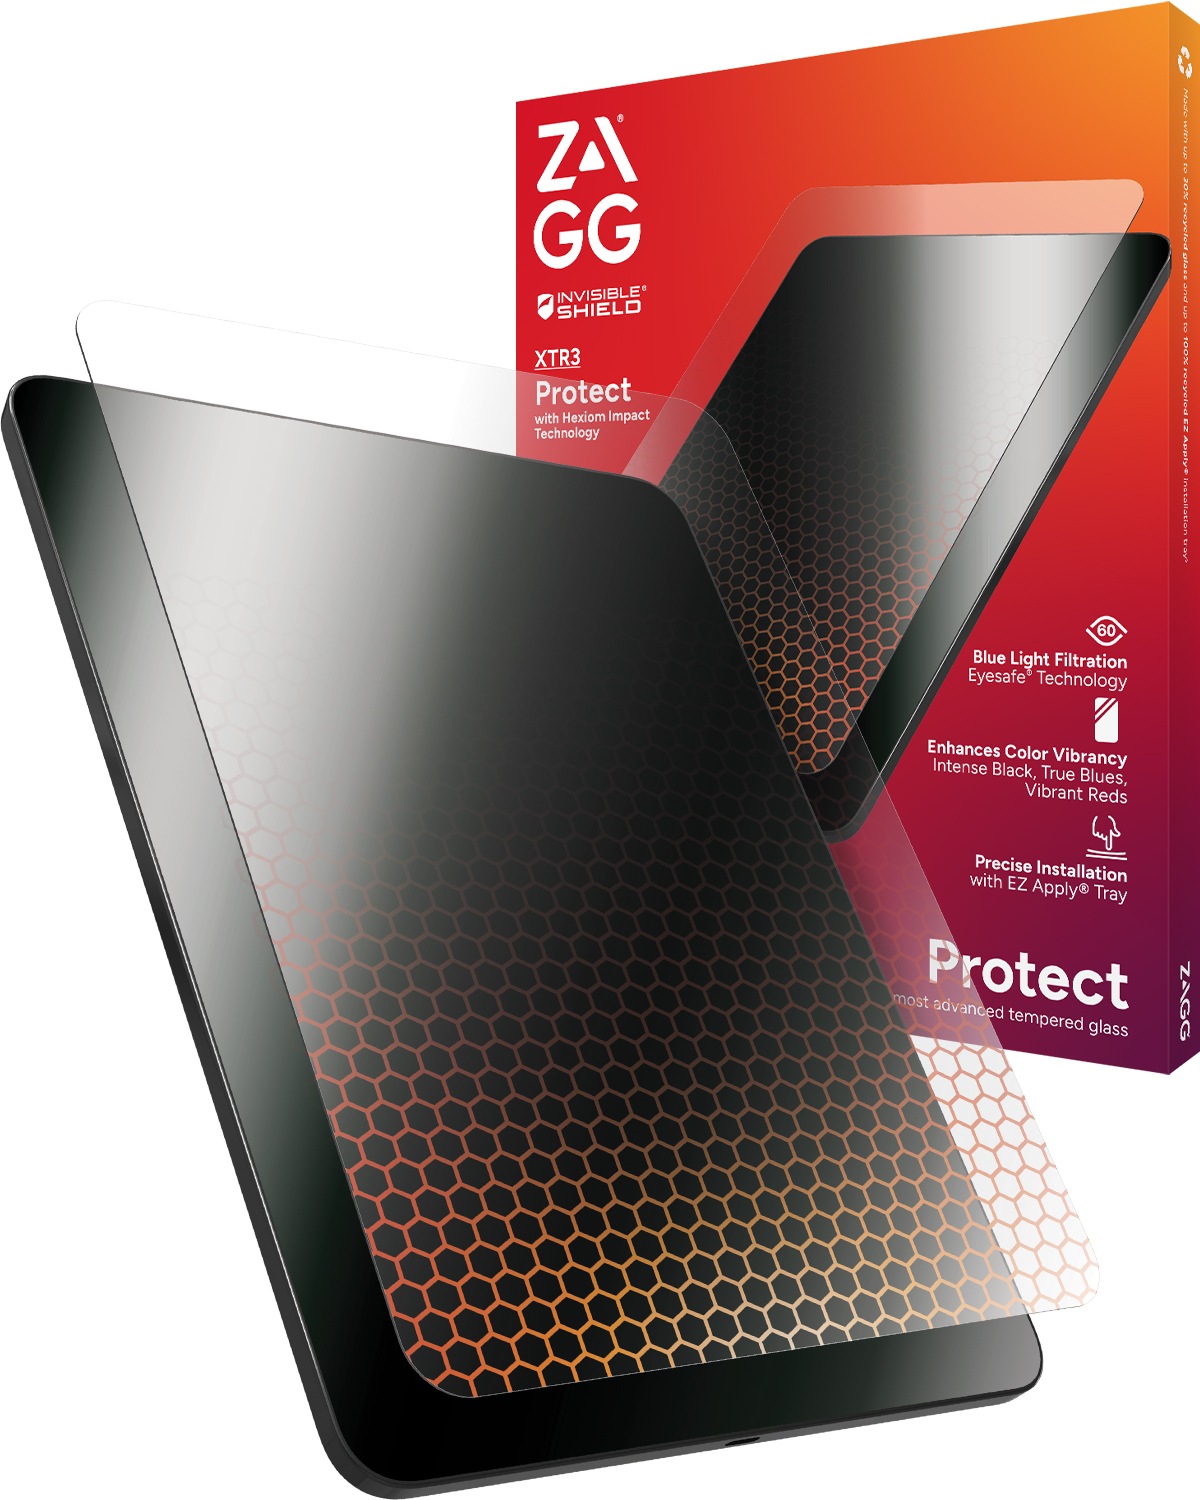 Made with Hexiom impact technology, Glass XTR3 is ZAGG’s most technologically advanced screen protector.